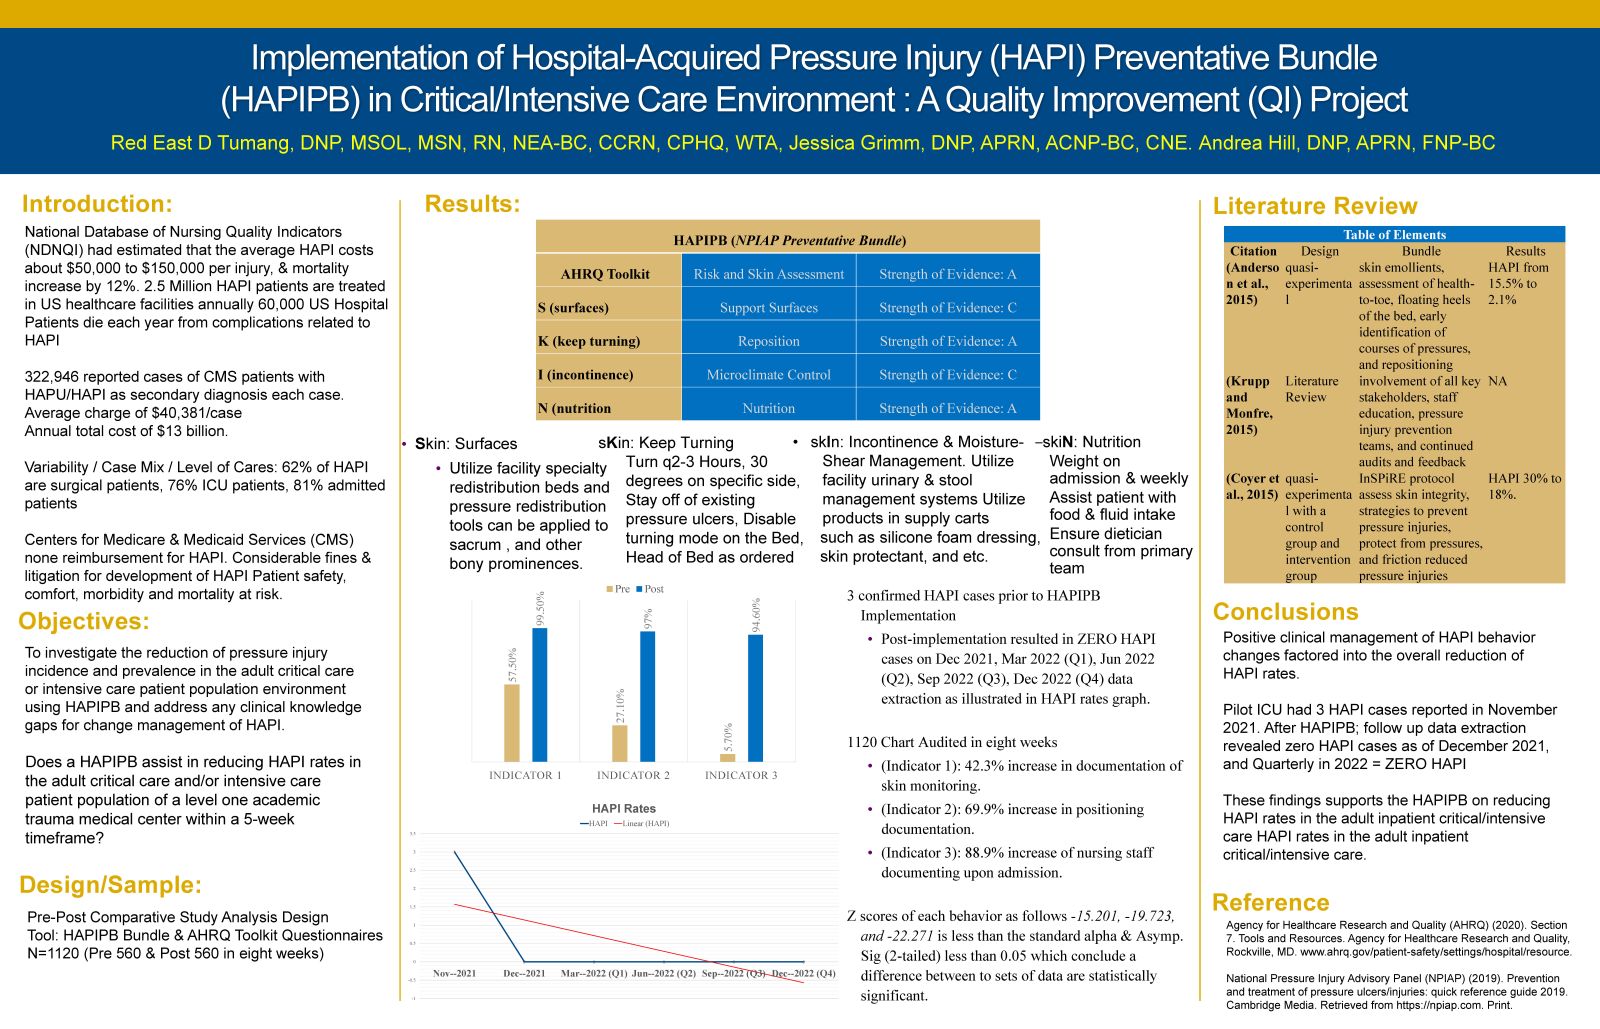 Implementation of Hospital Hospital-Acquired Pressure Injury (HAPI) Preventative Bundle (HAPIPB) in Critical/Intensive Care Environment : A Quality Improvement (QI) Project